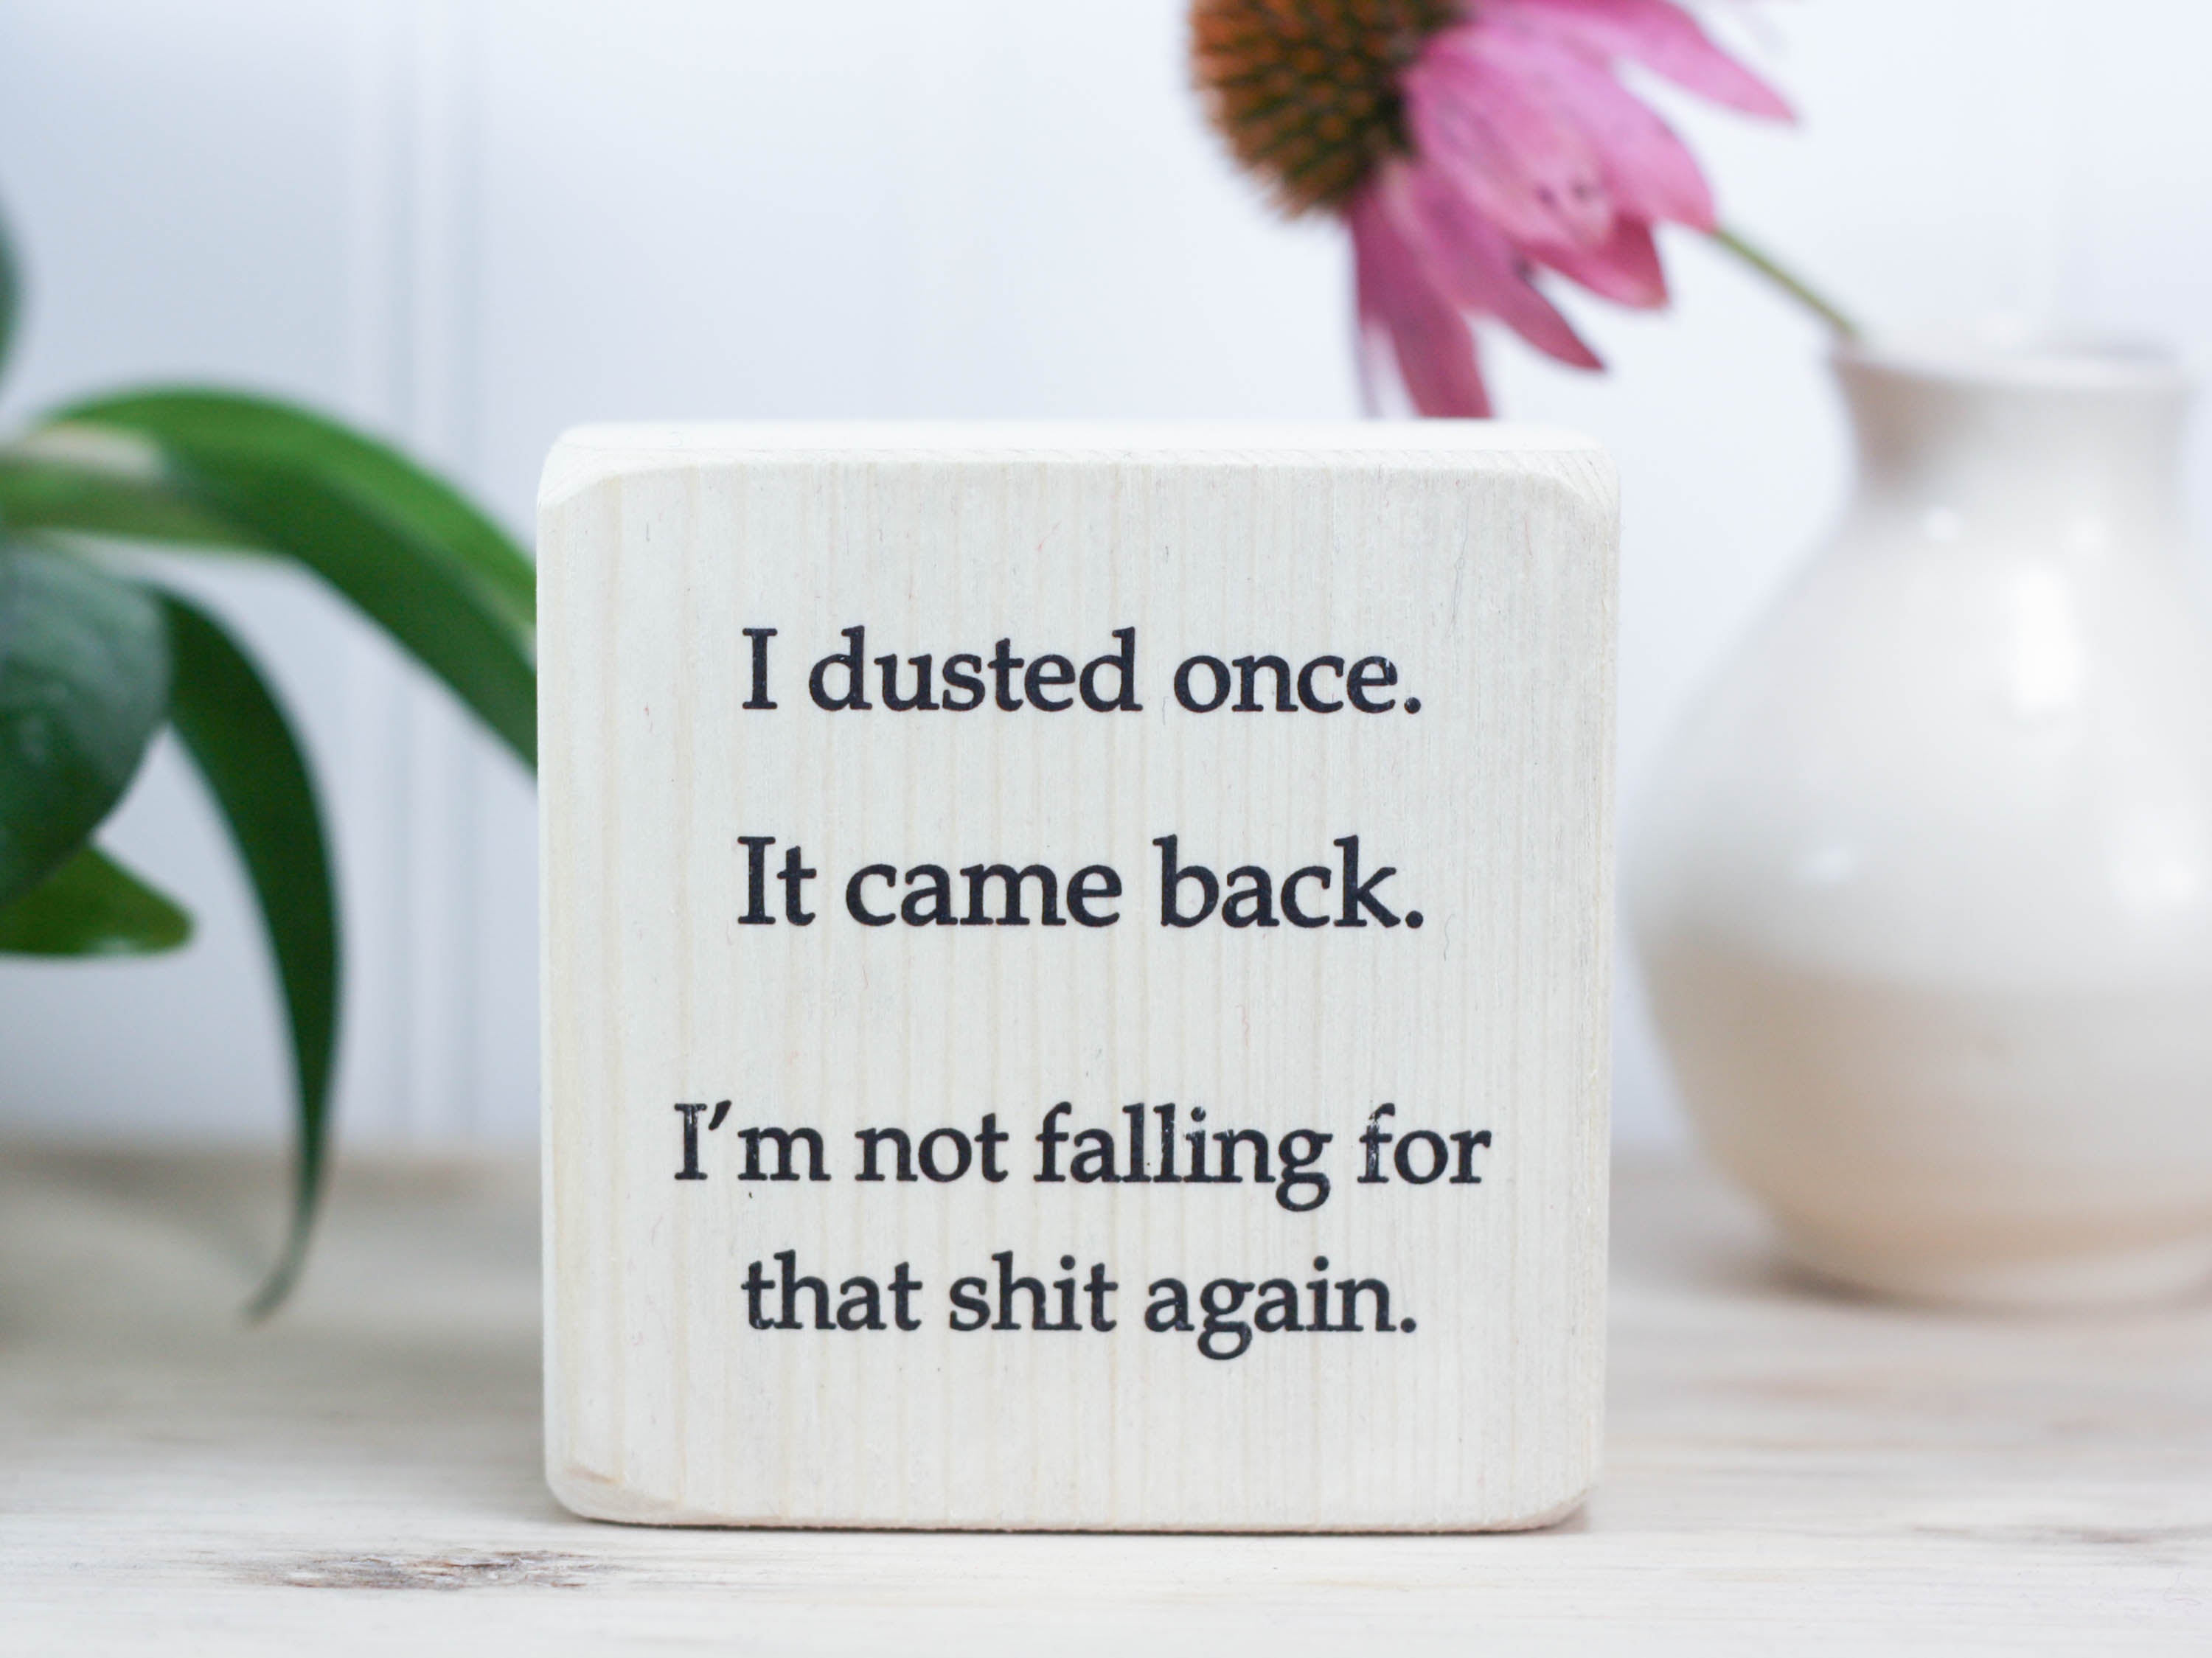 Small, freestanding, whitewash, solid wood sign with a funny saying on it "I dusted once. It came back. I'm not falling for that shit again."